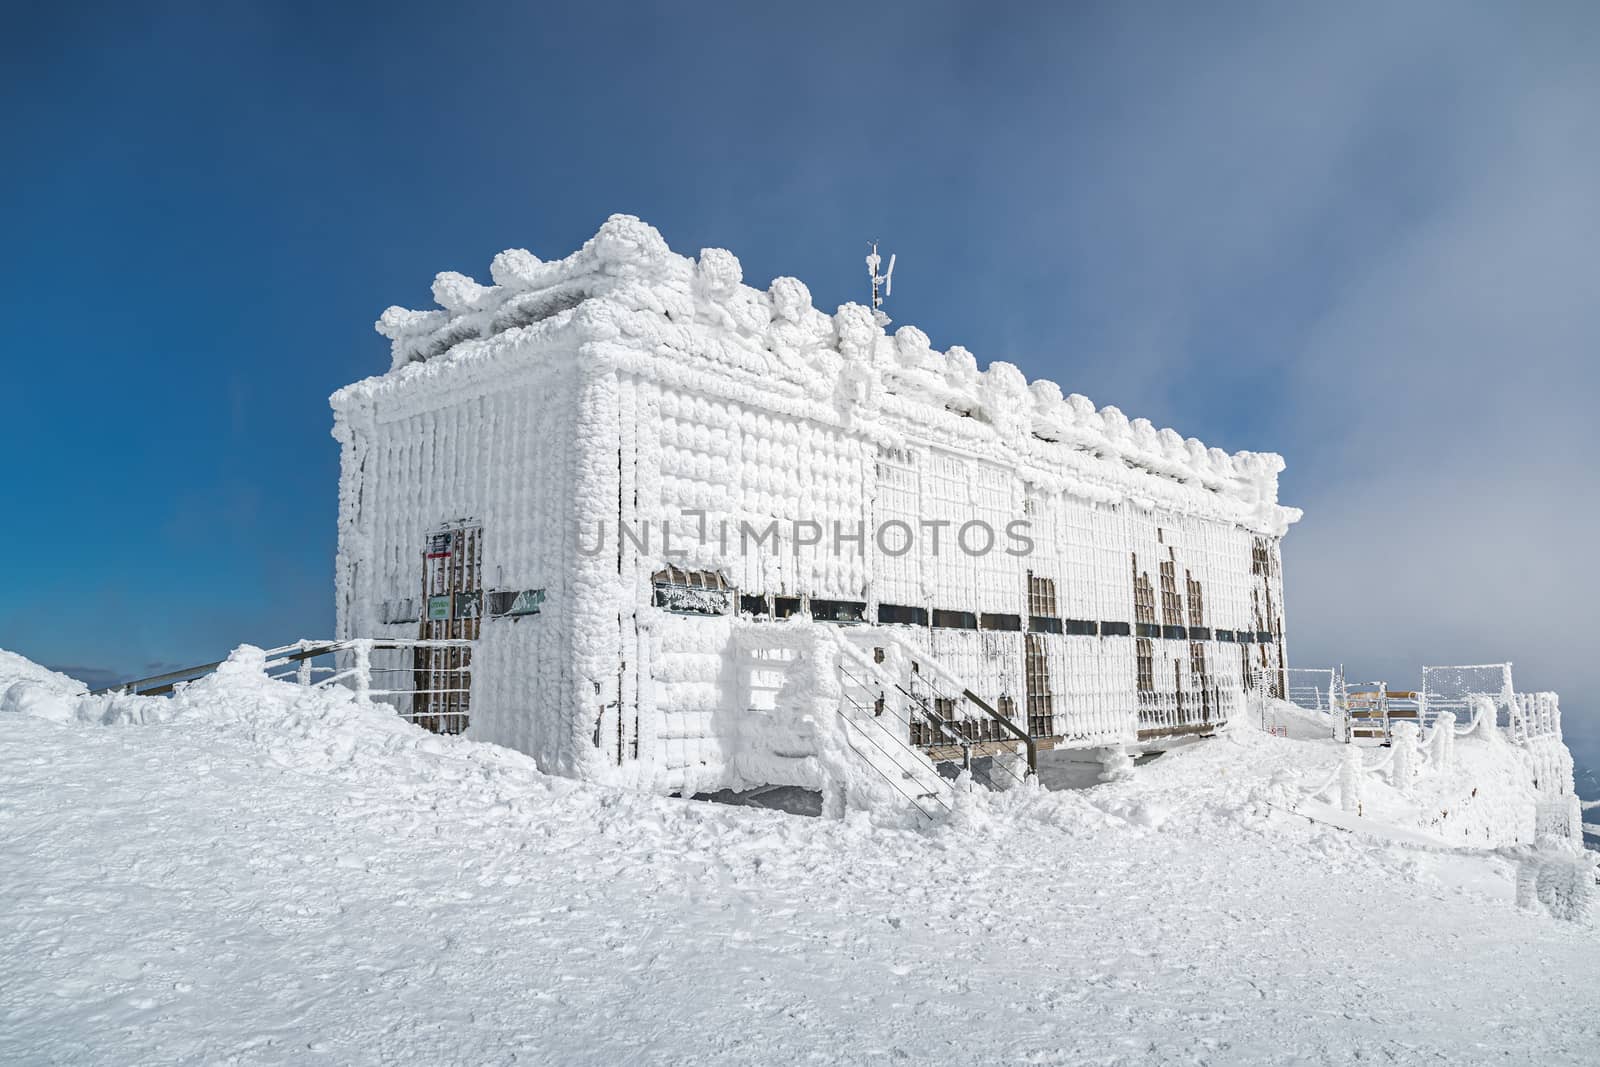 Post office called Postovna on top of Snezka covered with frost. The peak of the Snezka Mountain in winter in the Krkonose Mountains. Czech Republic by petrsvoboda91